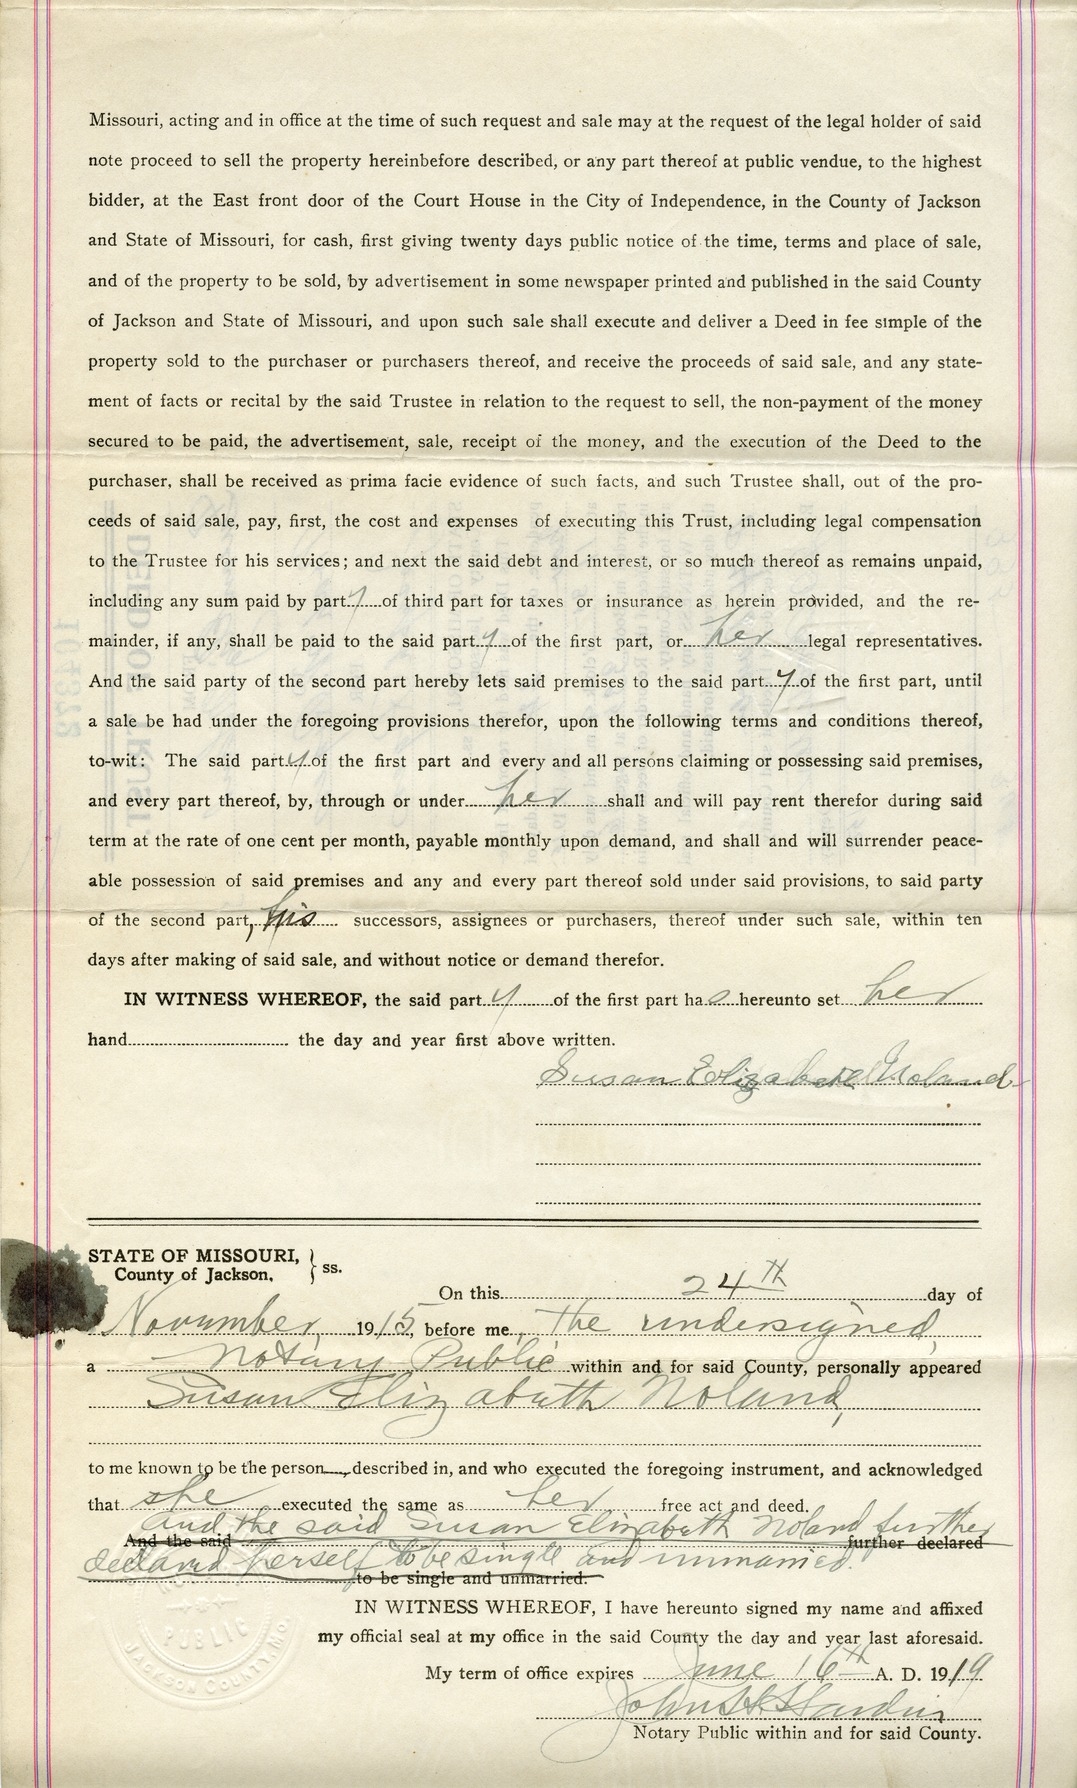 Deed of Trust from Susan Elizabeth Noland to Noah W. Rogers for Joseph Rogers